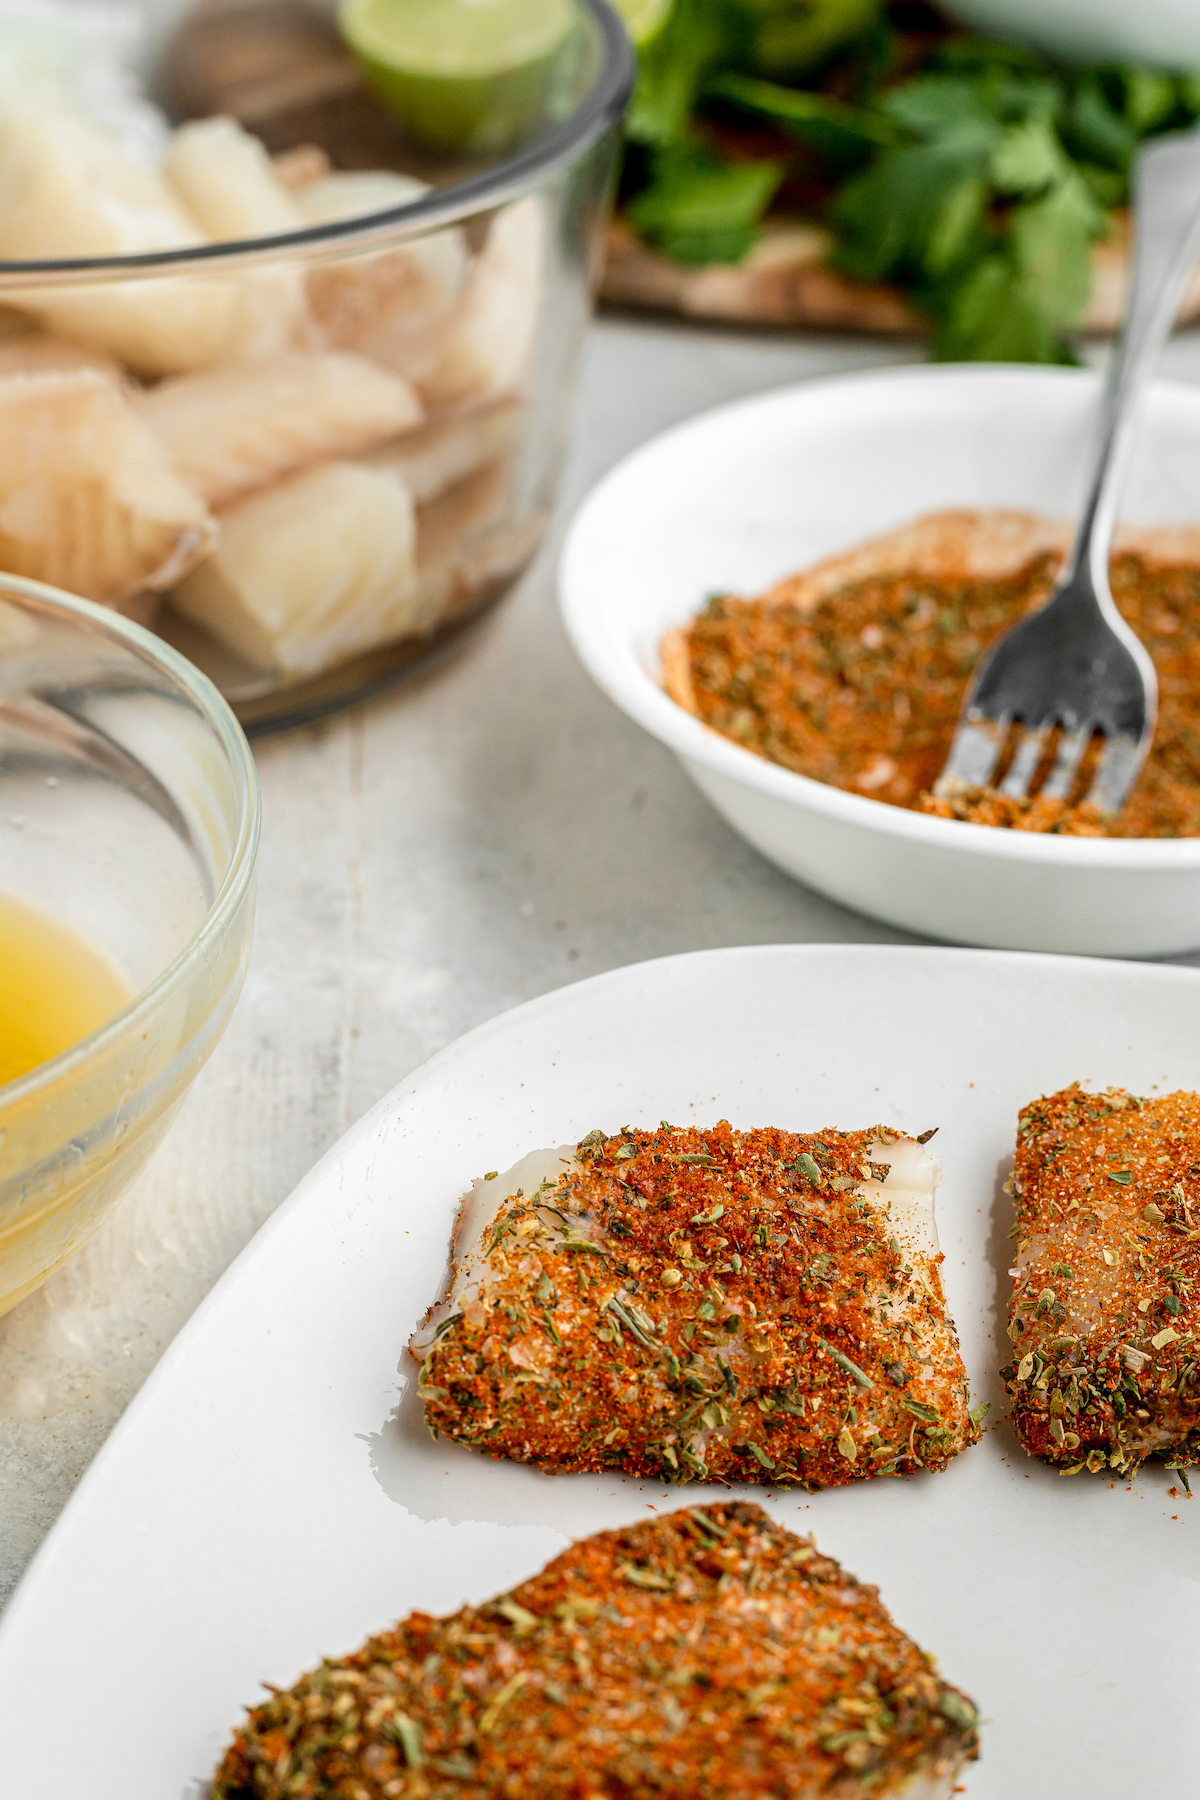 Fish fillets coated with spices on a plate with fish, butter, and spices in the background.